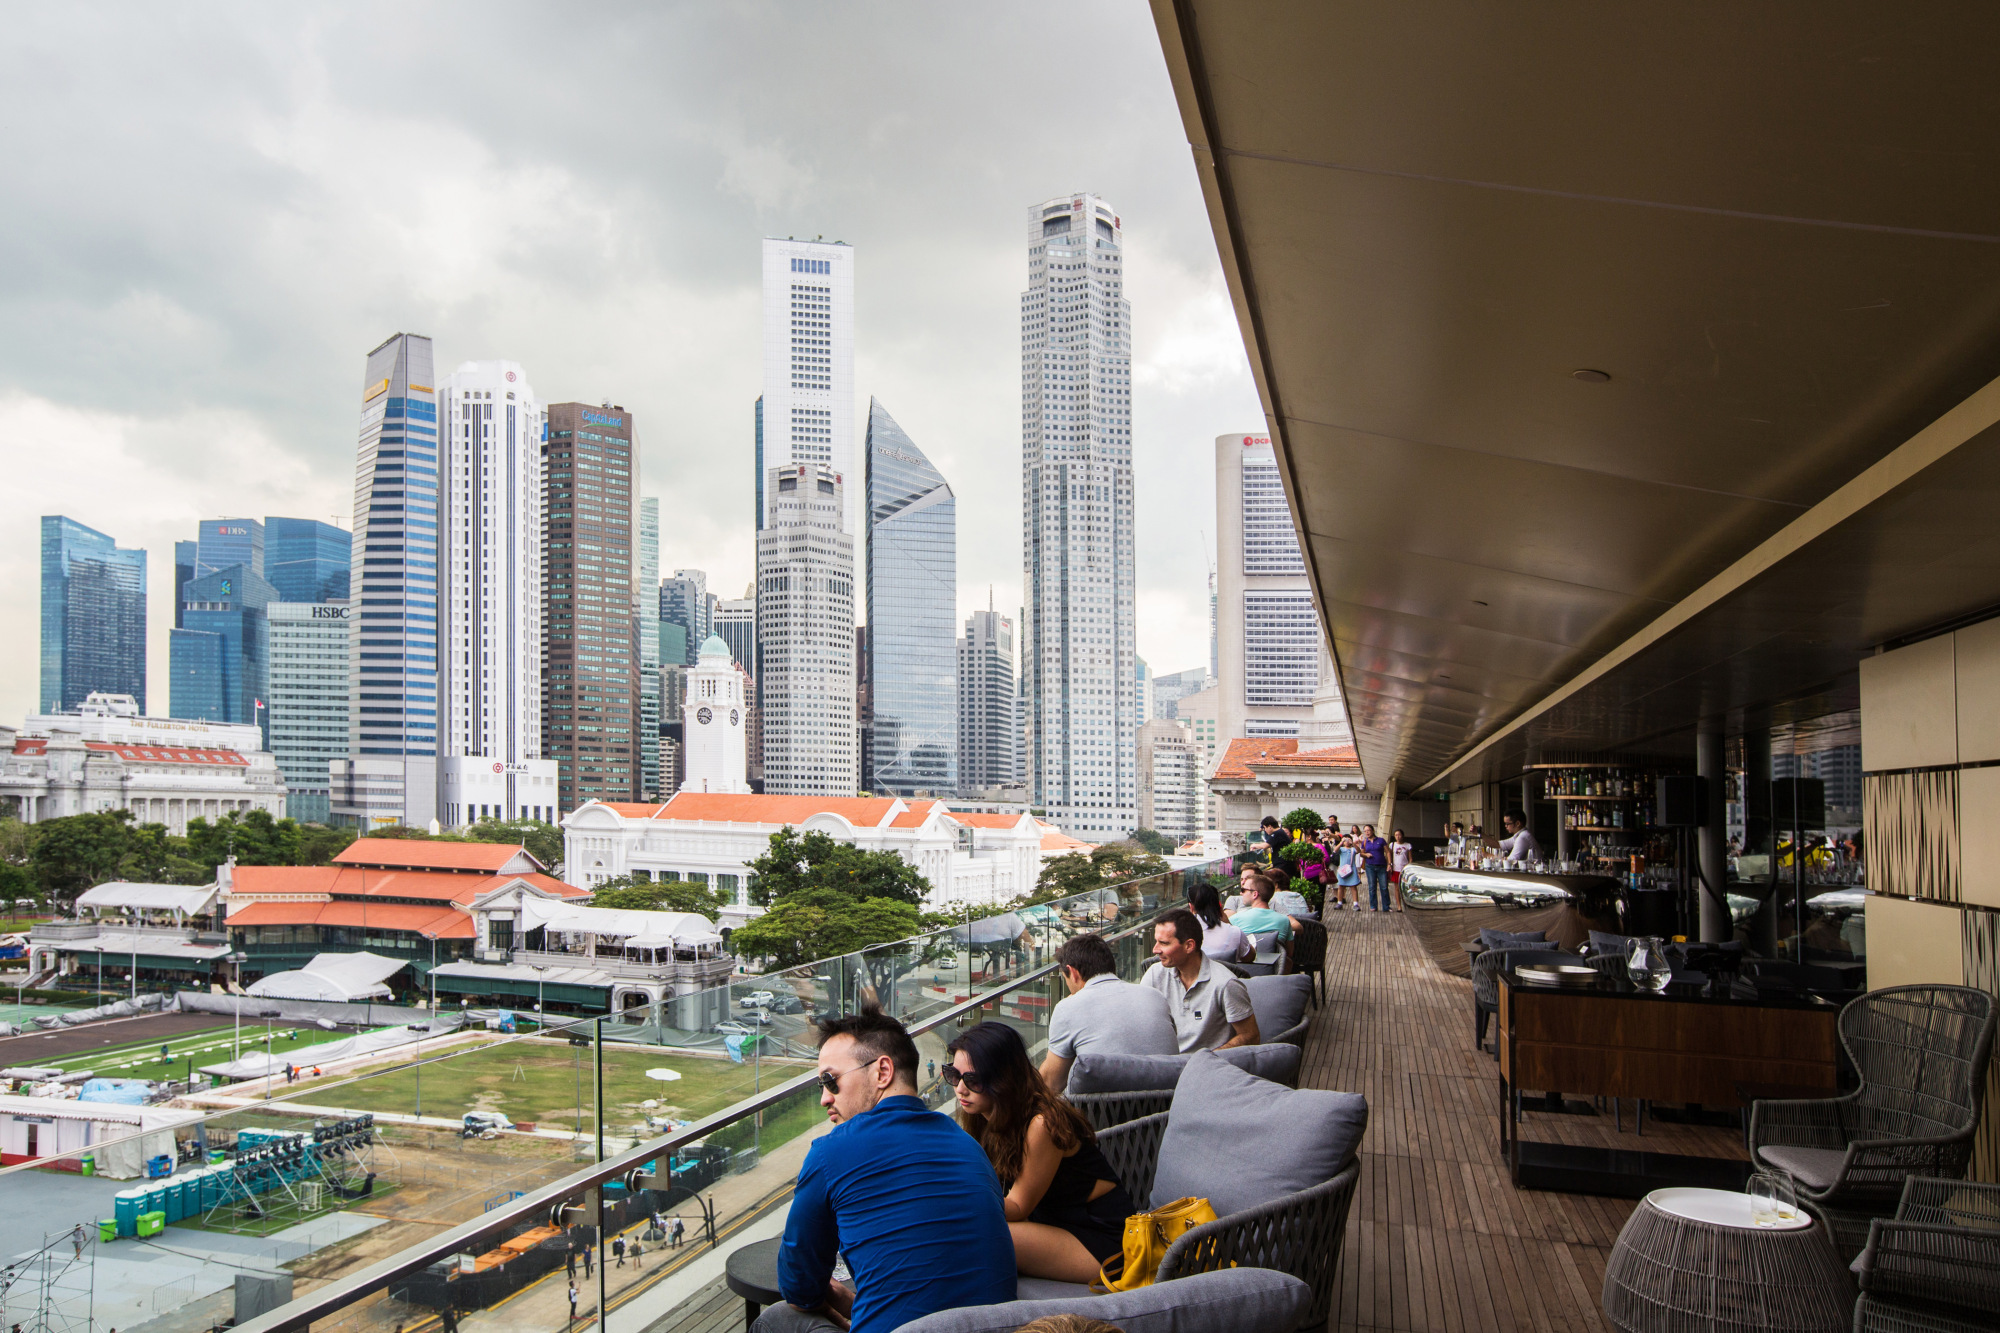 Visitors sit in a cafe at the National Gallery Singapore as commercial buildings stand in the background in Singapore, on Friday, Nov. 27, 2015. Photographer: Nicky Loh/Bloomberg